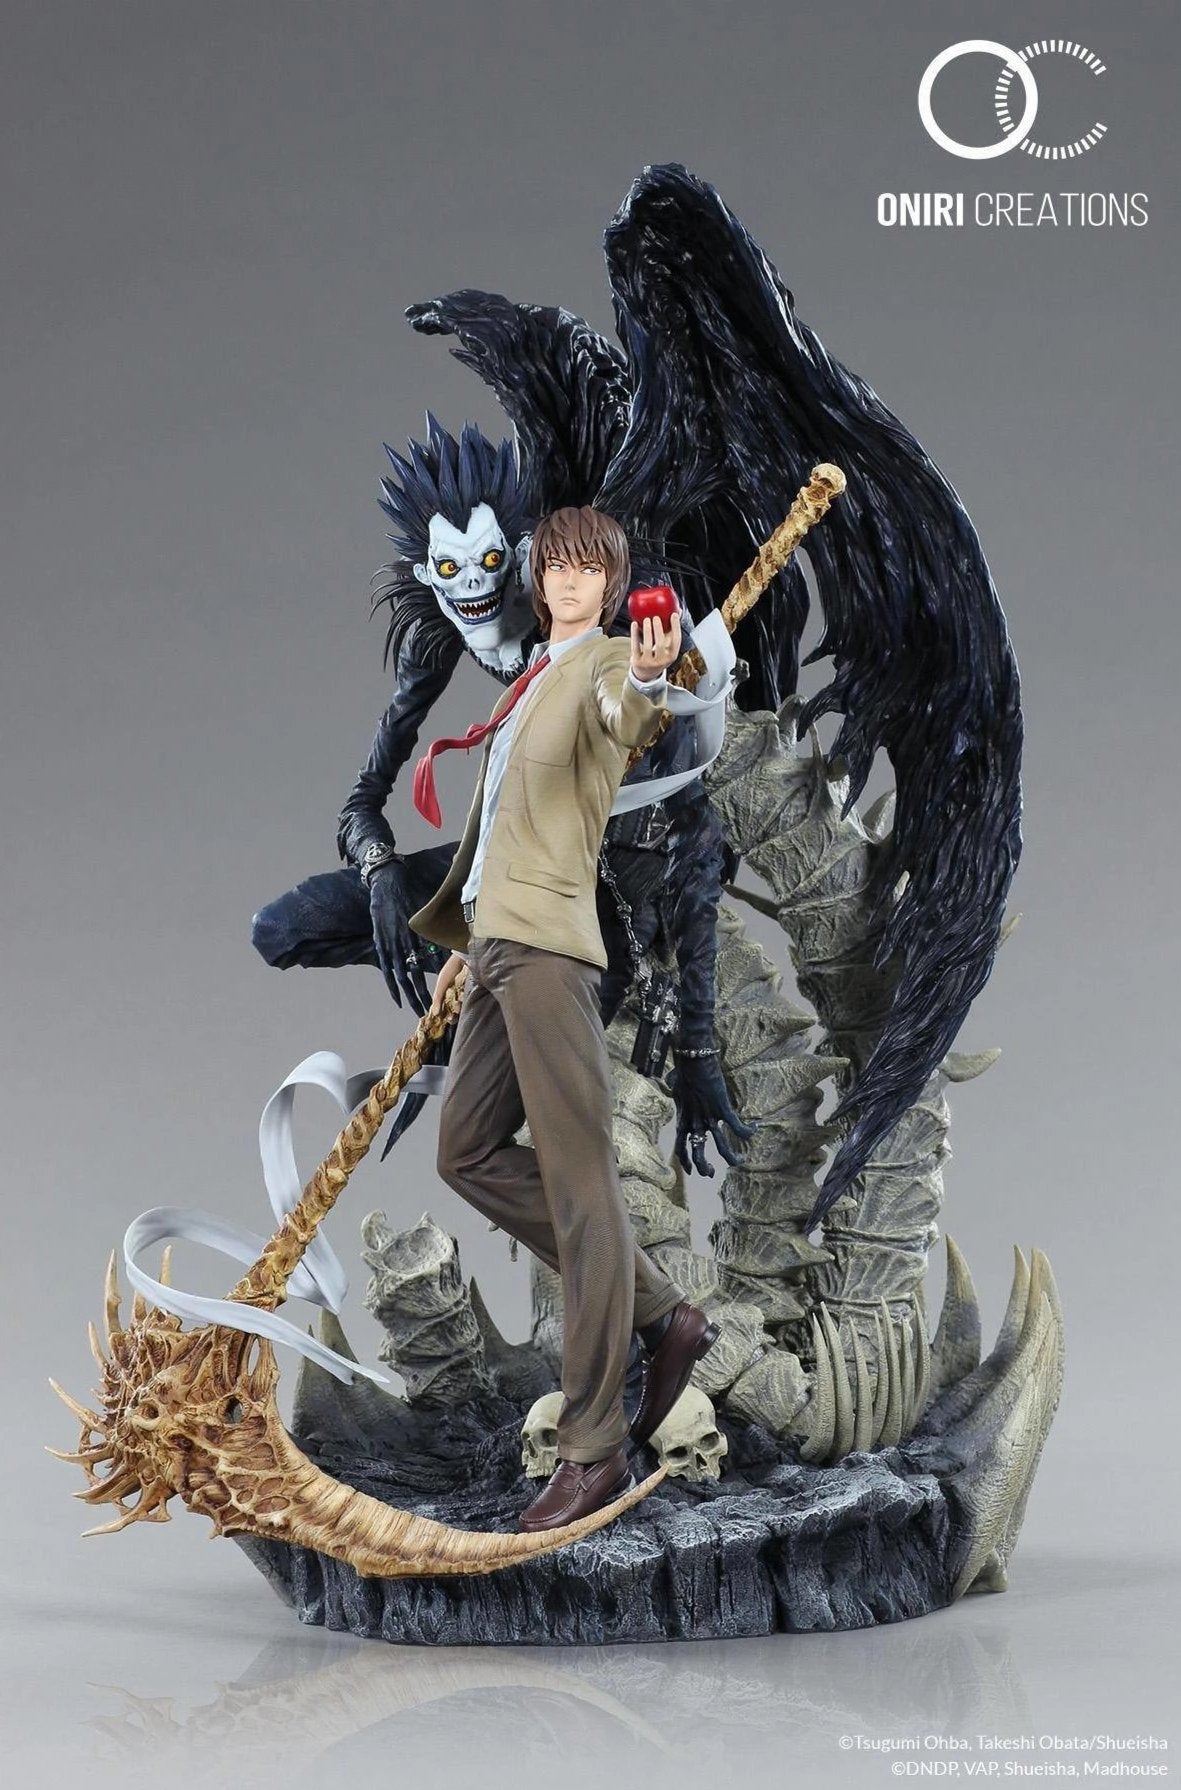 Death Note 1:6 Scale Statue by Oniri Creations - Spec Fiction Shop